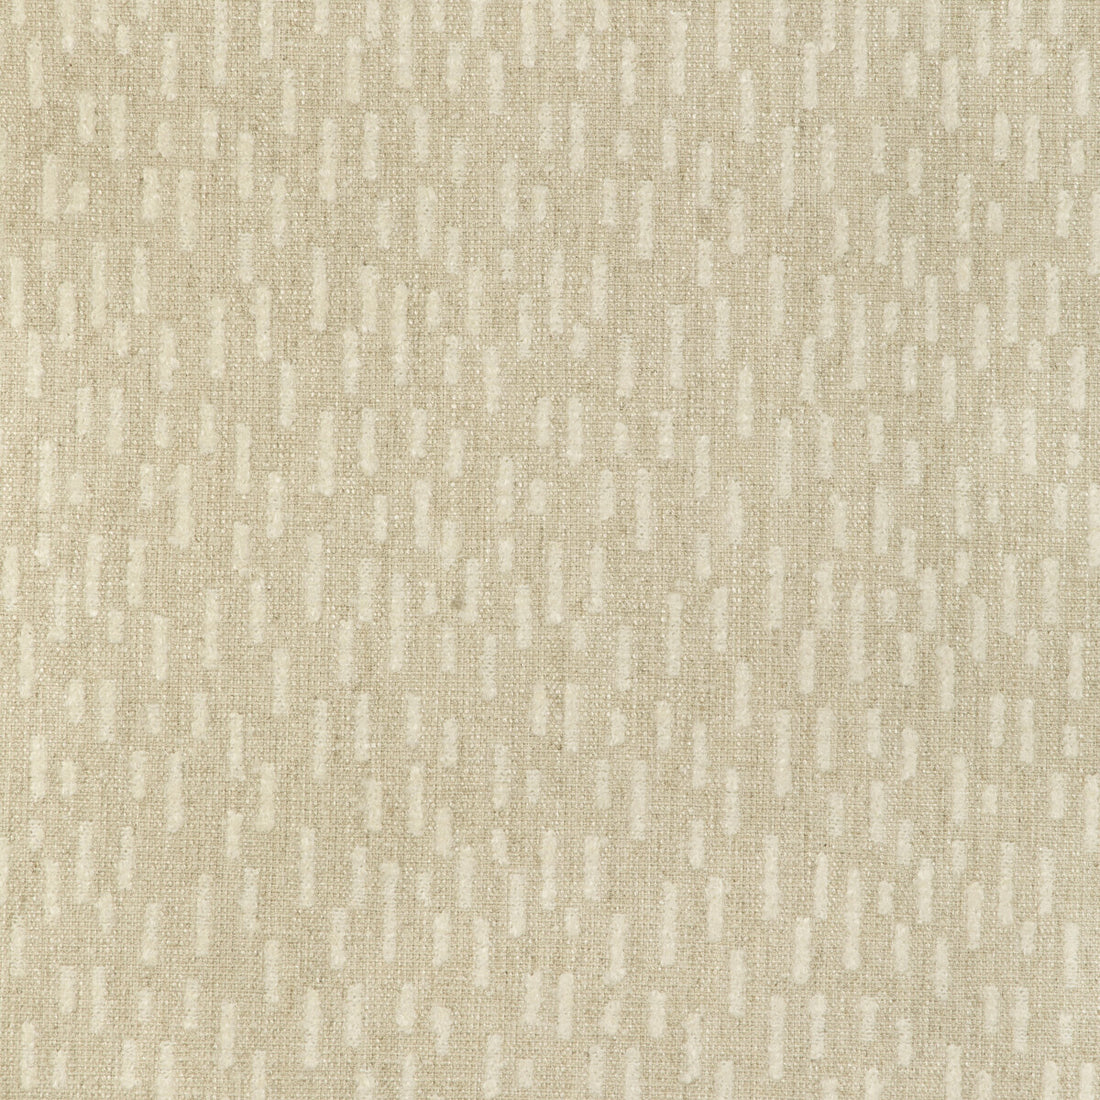 Slew fabric in cloud color - pattern GWF-3794.1.0 - by Lee Jofa Modern in the Kelly Wearstler VII collection